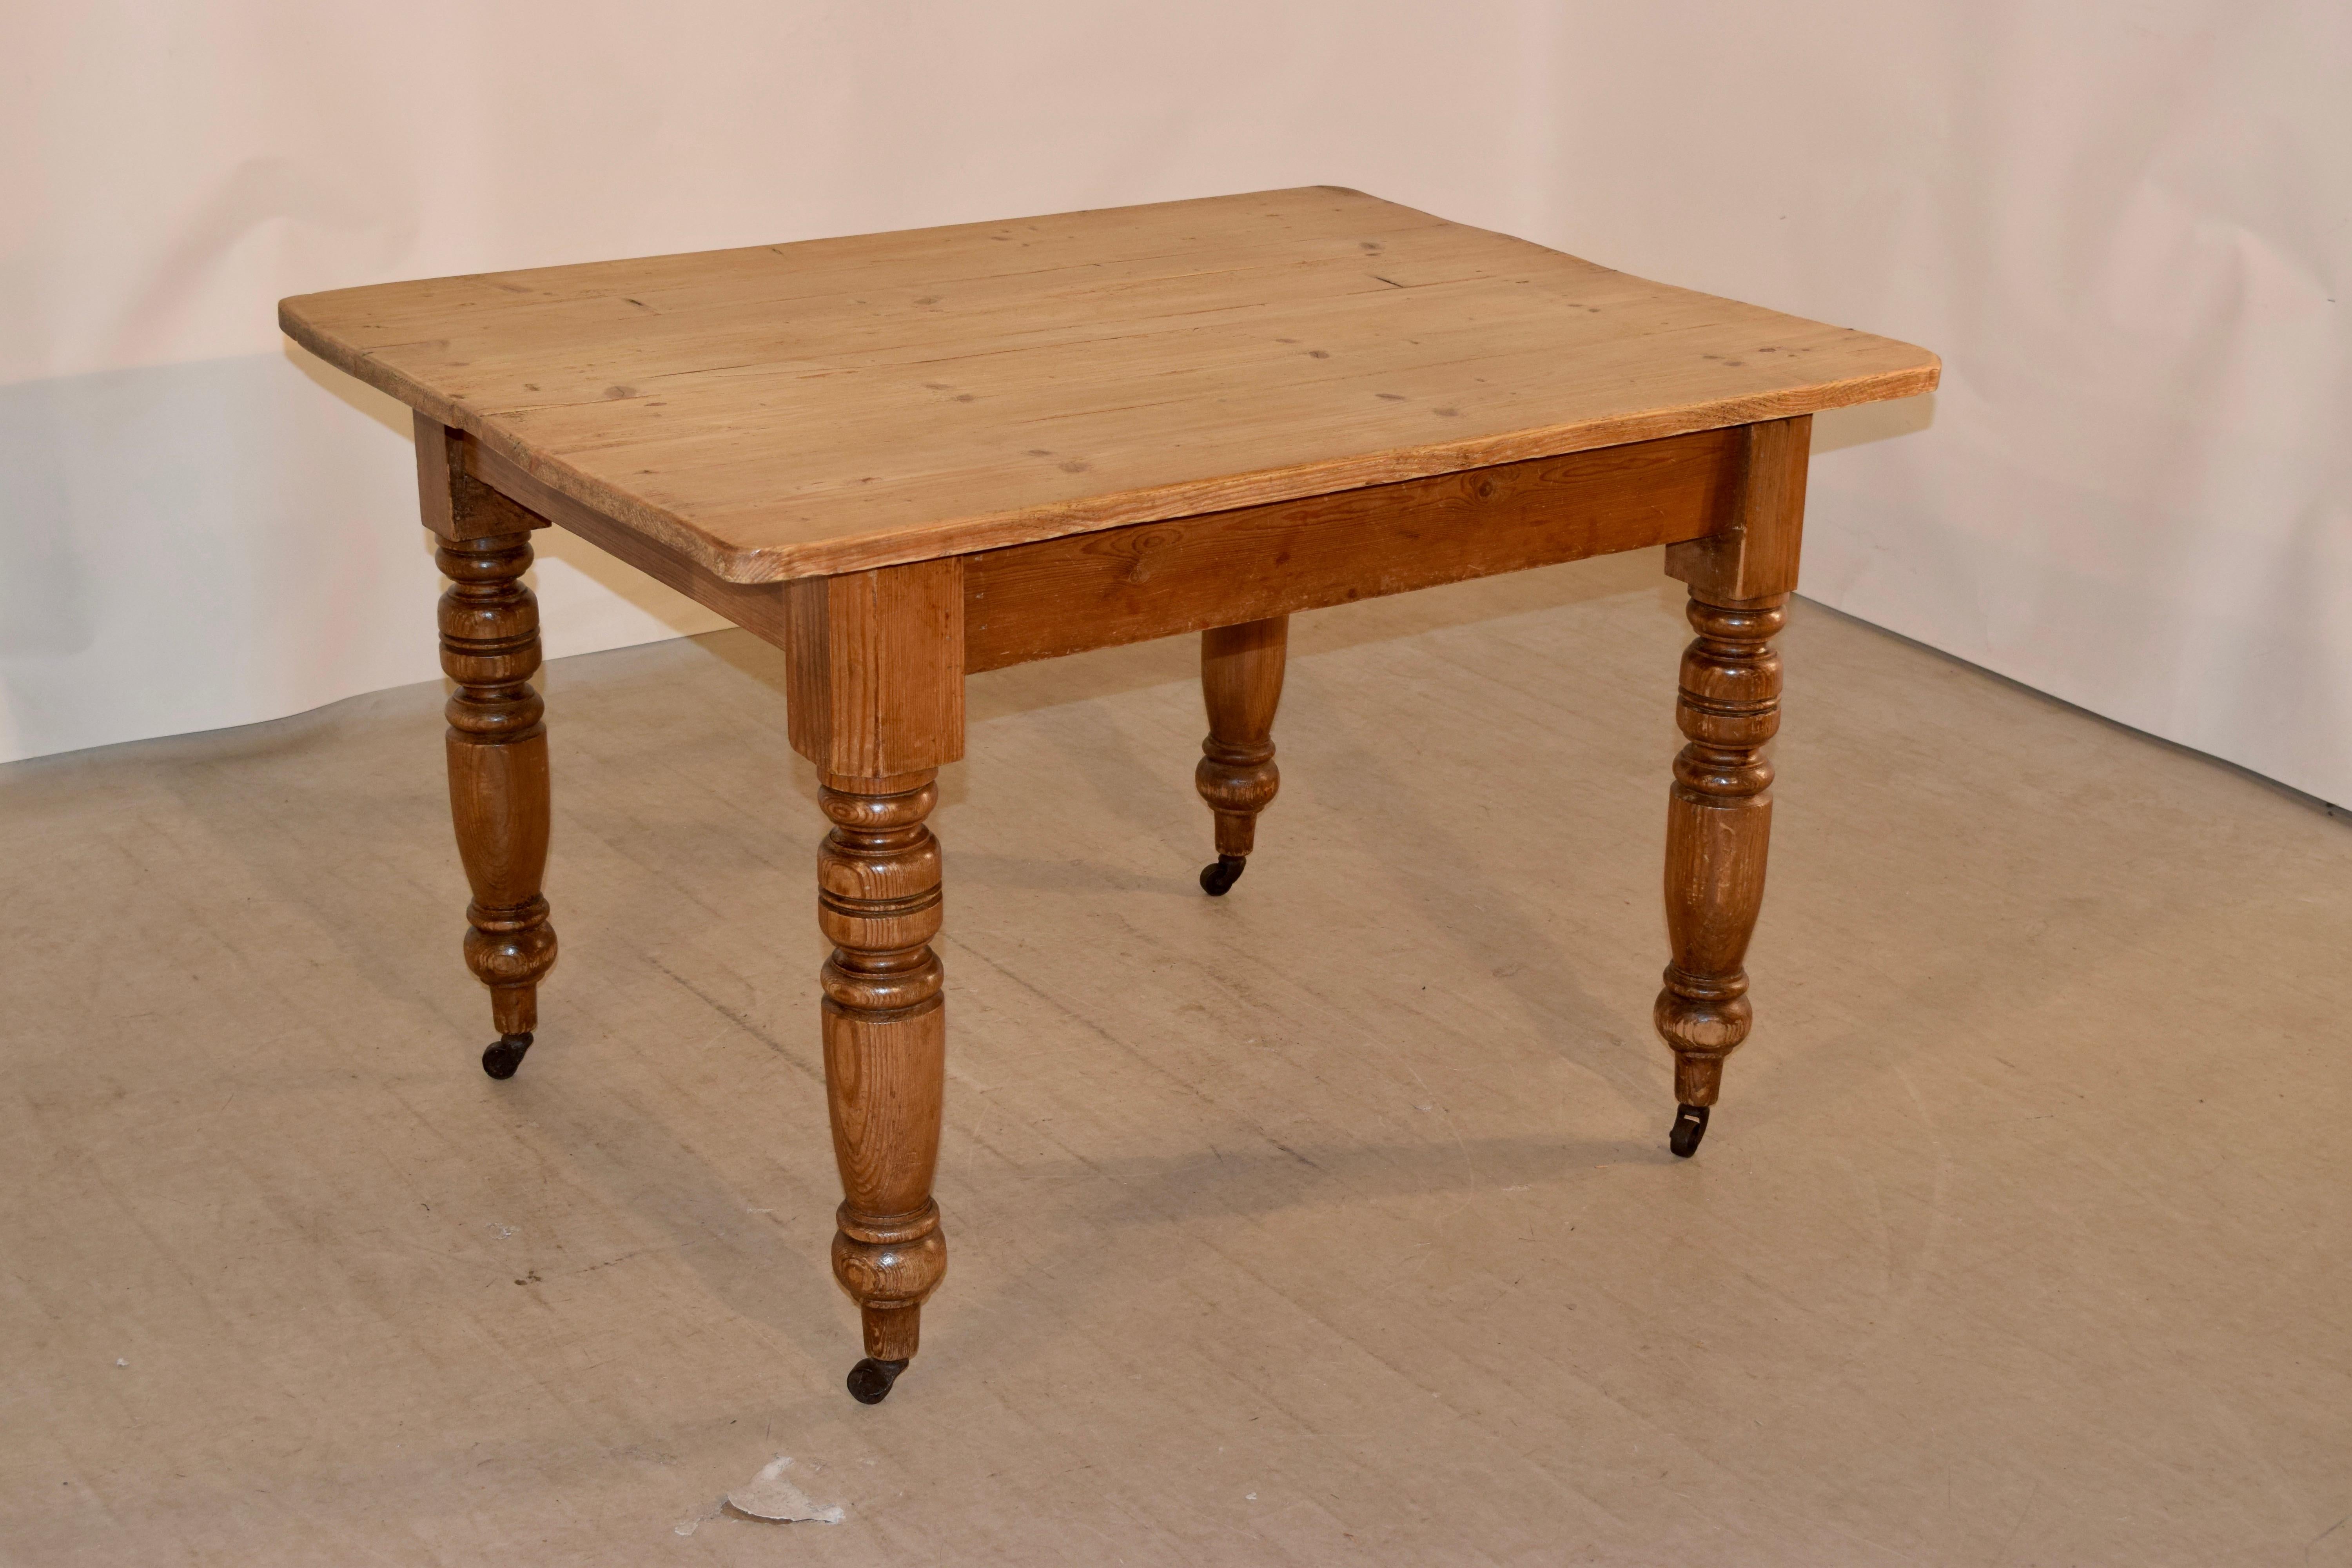 19th century English pine farm table with a four plank top, following down to simple aprons and supported on thickly hand-turned legs, supported on what appear to be original casters. The apron measures 24 inches in height.